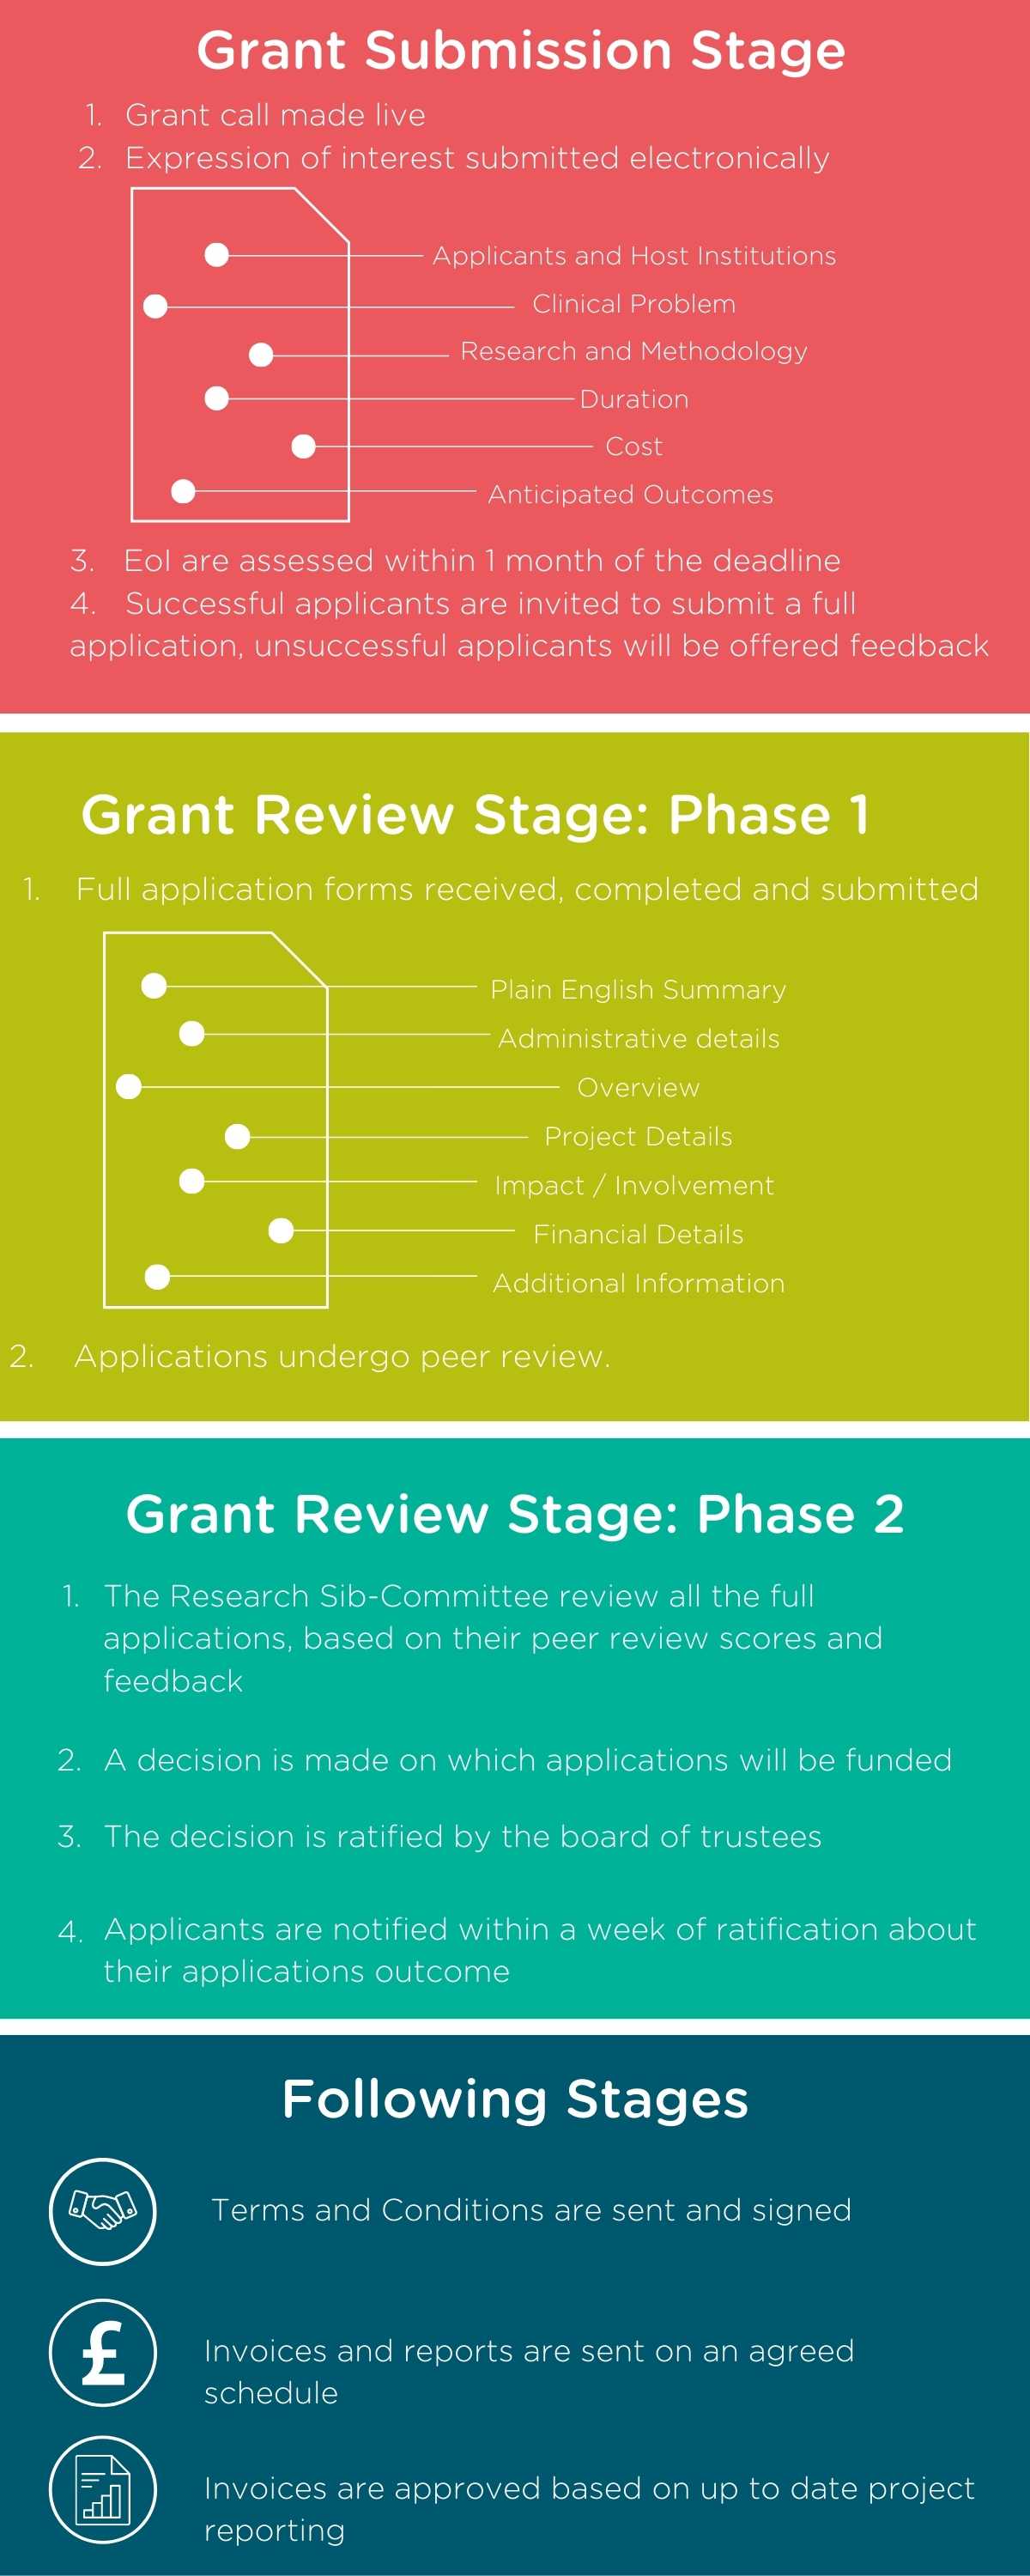 Grant Submission Stage (1).jpg